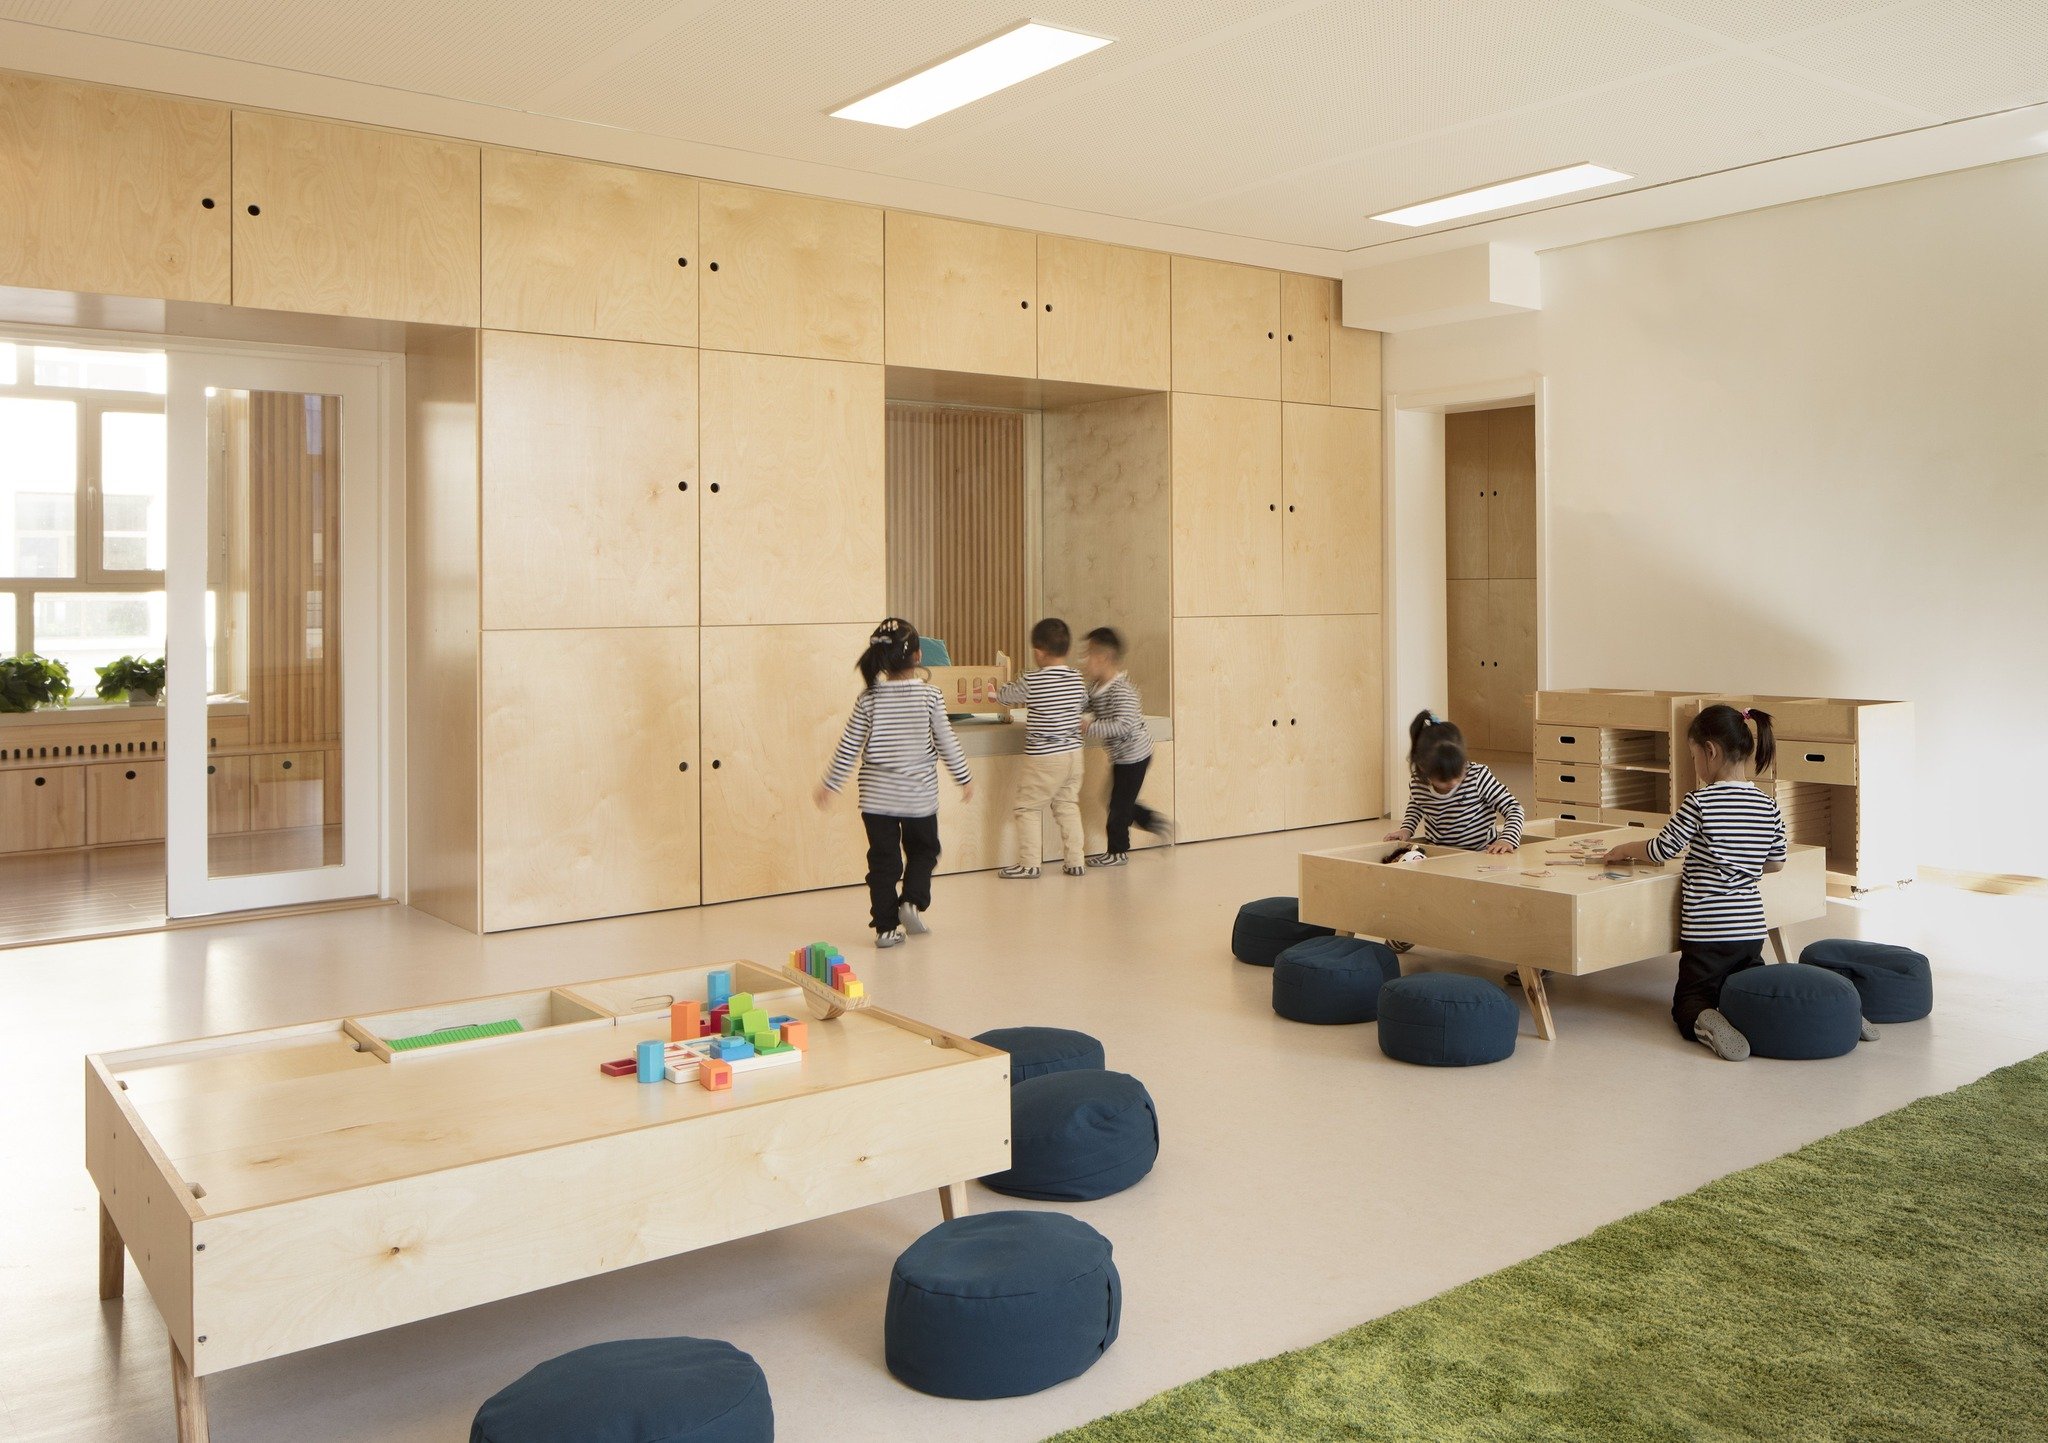 🌟 Introducing the HEI Schools Design 🌟

Step into a world where every corner is crafted with care and creativity. At HEI Schools, our spaces aren't just classrooms &ndash; they're nurturing environments of learning and joy. Created in collaboration